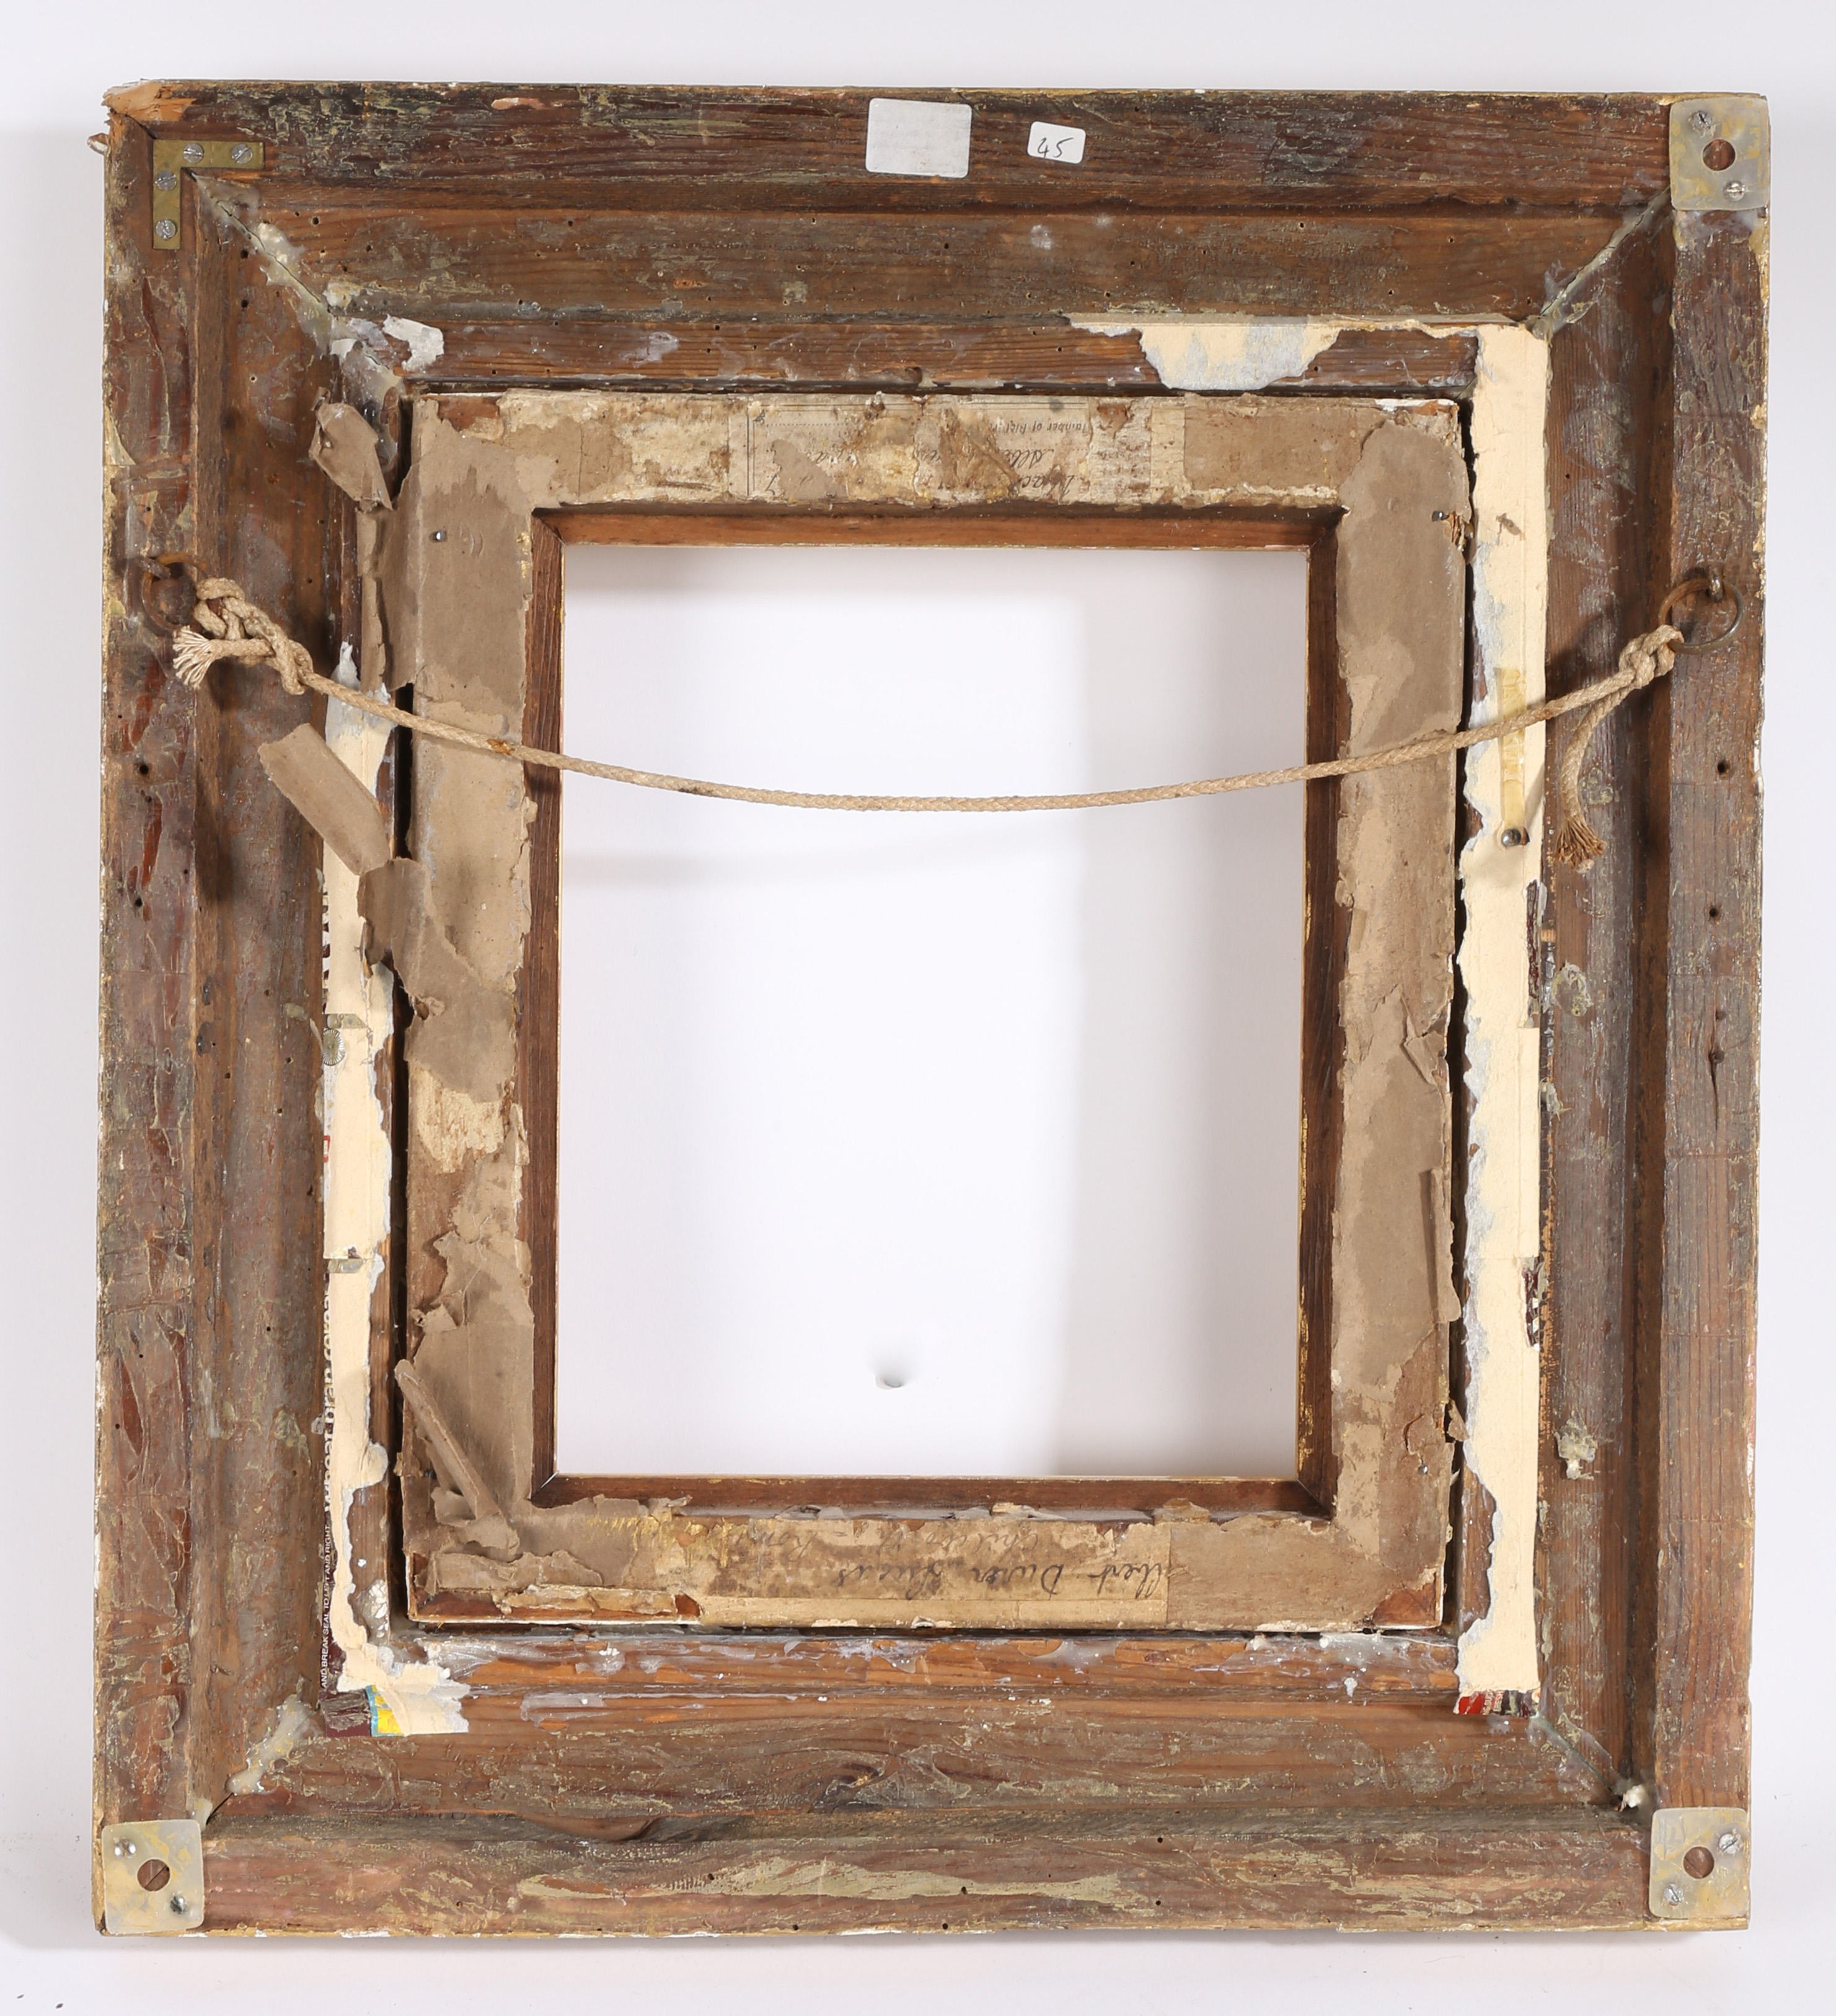 19th century heavy straight pattern picture frame - rebate size 10in x 8in - Image 2 of 3